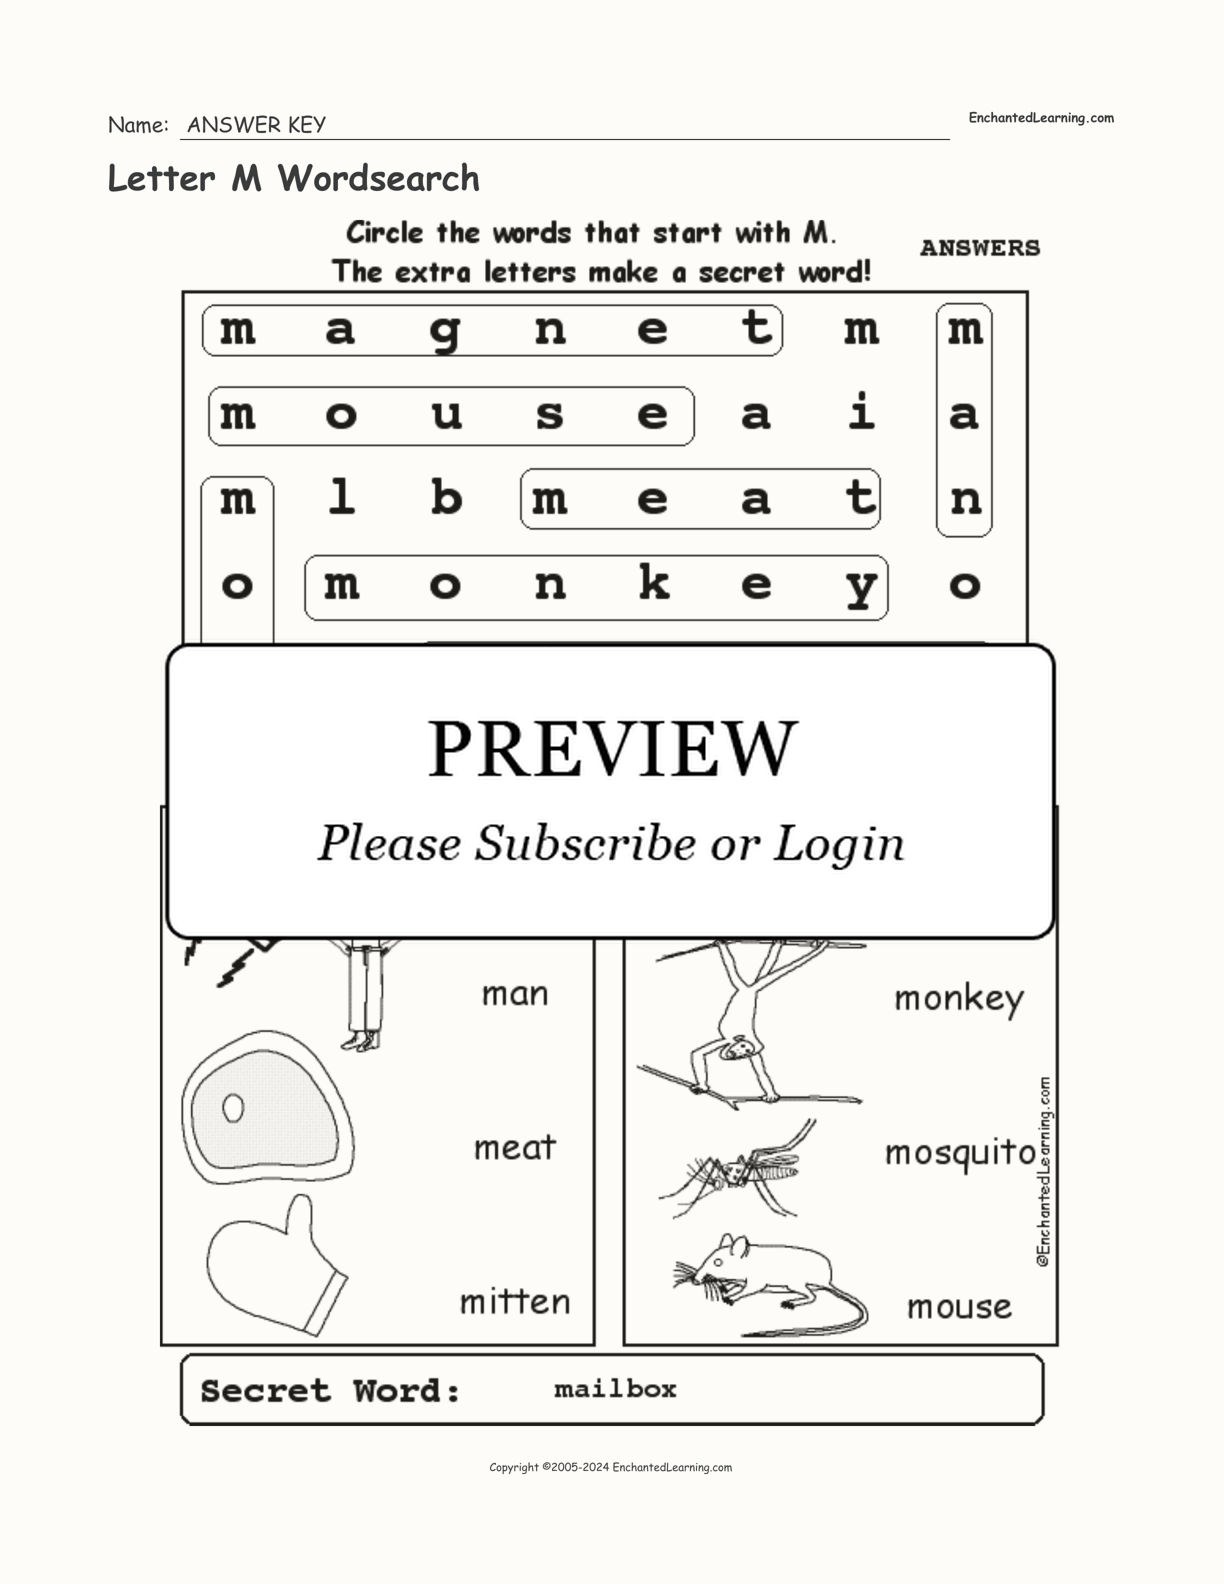 Letter M Wordsearch interactive worksheet page 2